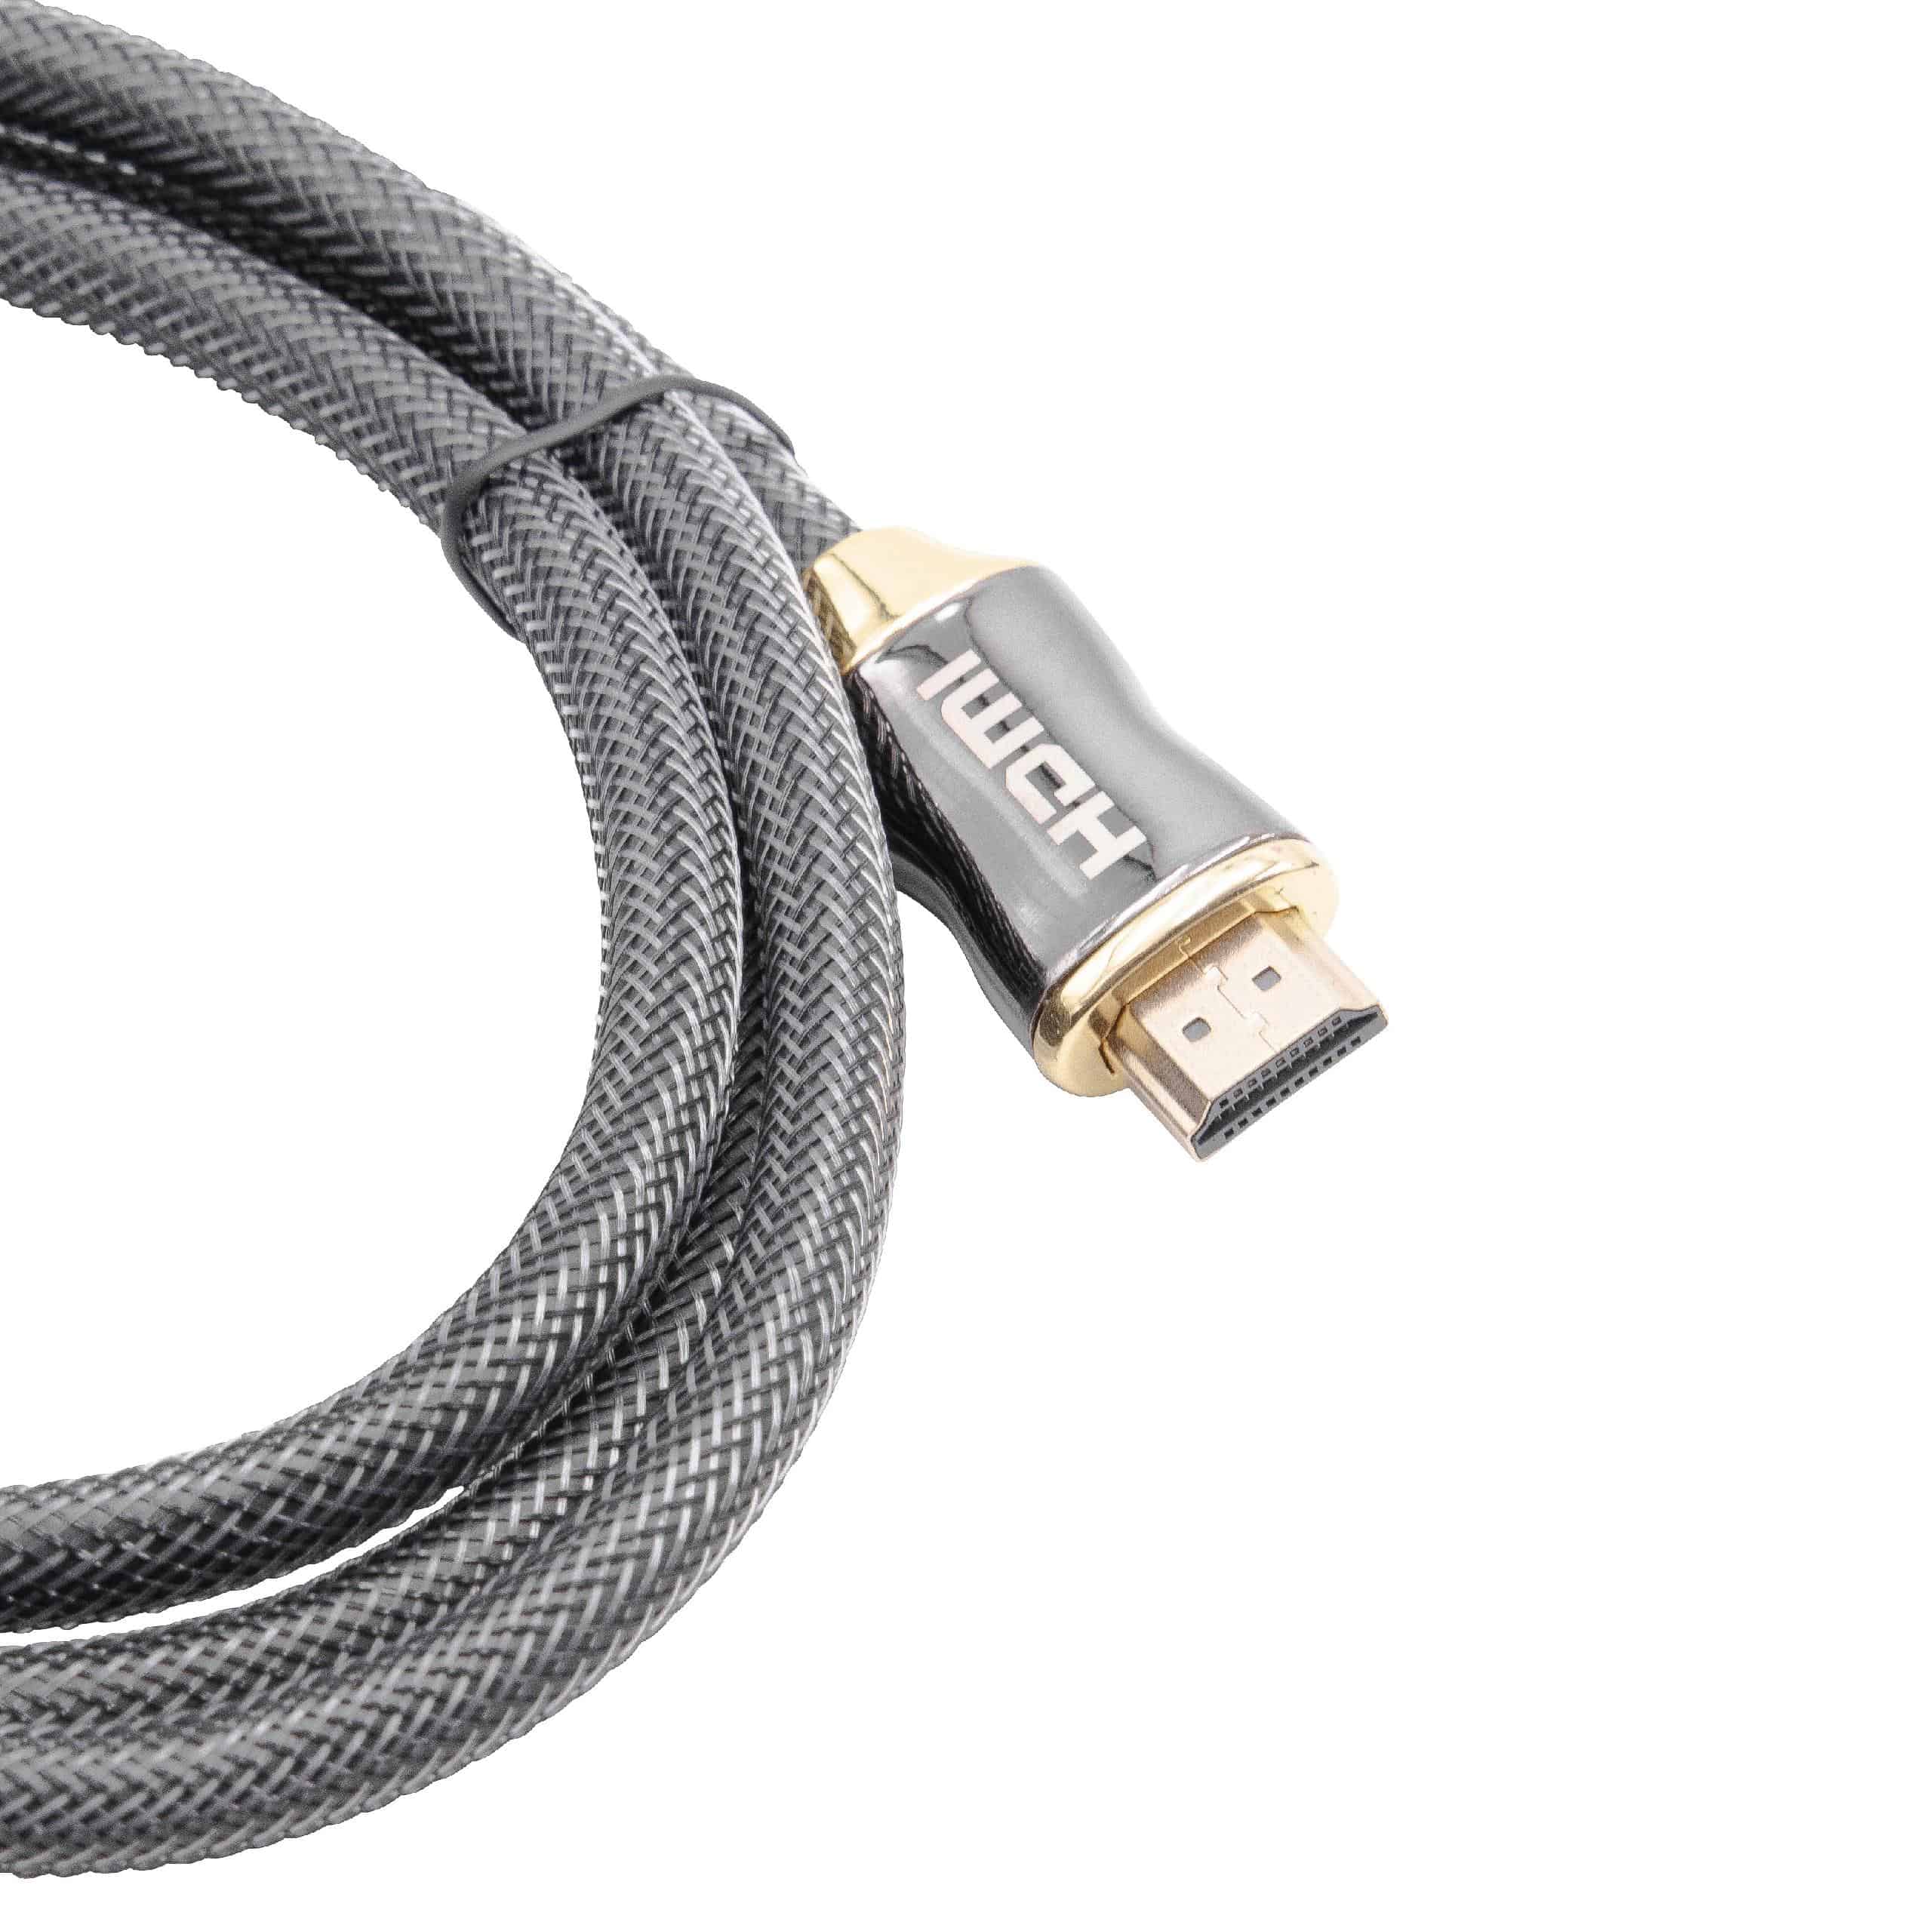 HDMI Cable Premium V2.0 Ultra HD TV braided 1.5mfor Tablet, TV, Television, Playstation, Computer, Monitor, DV